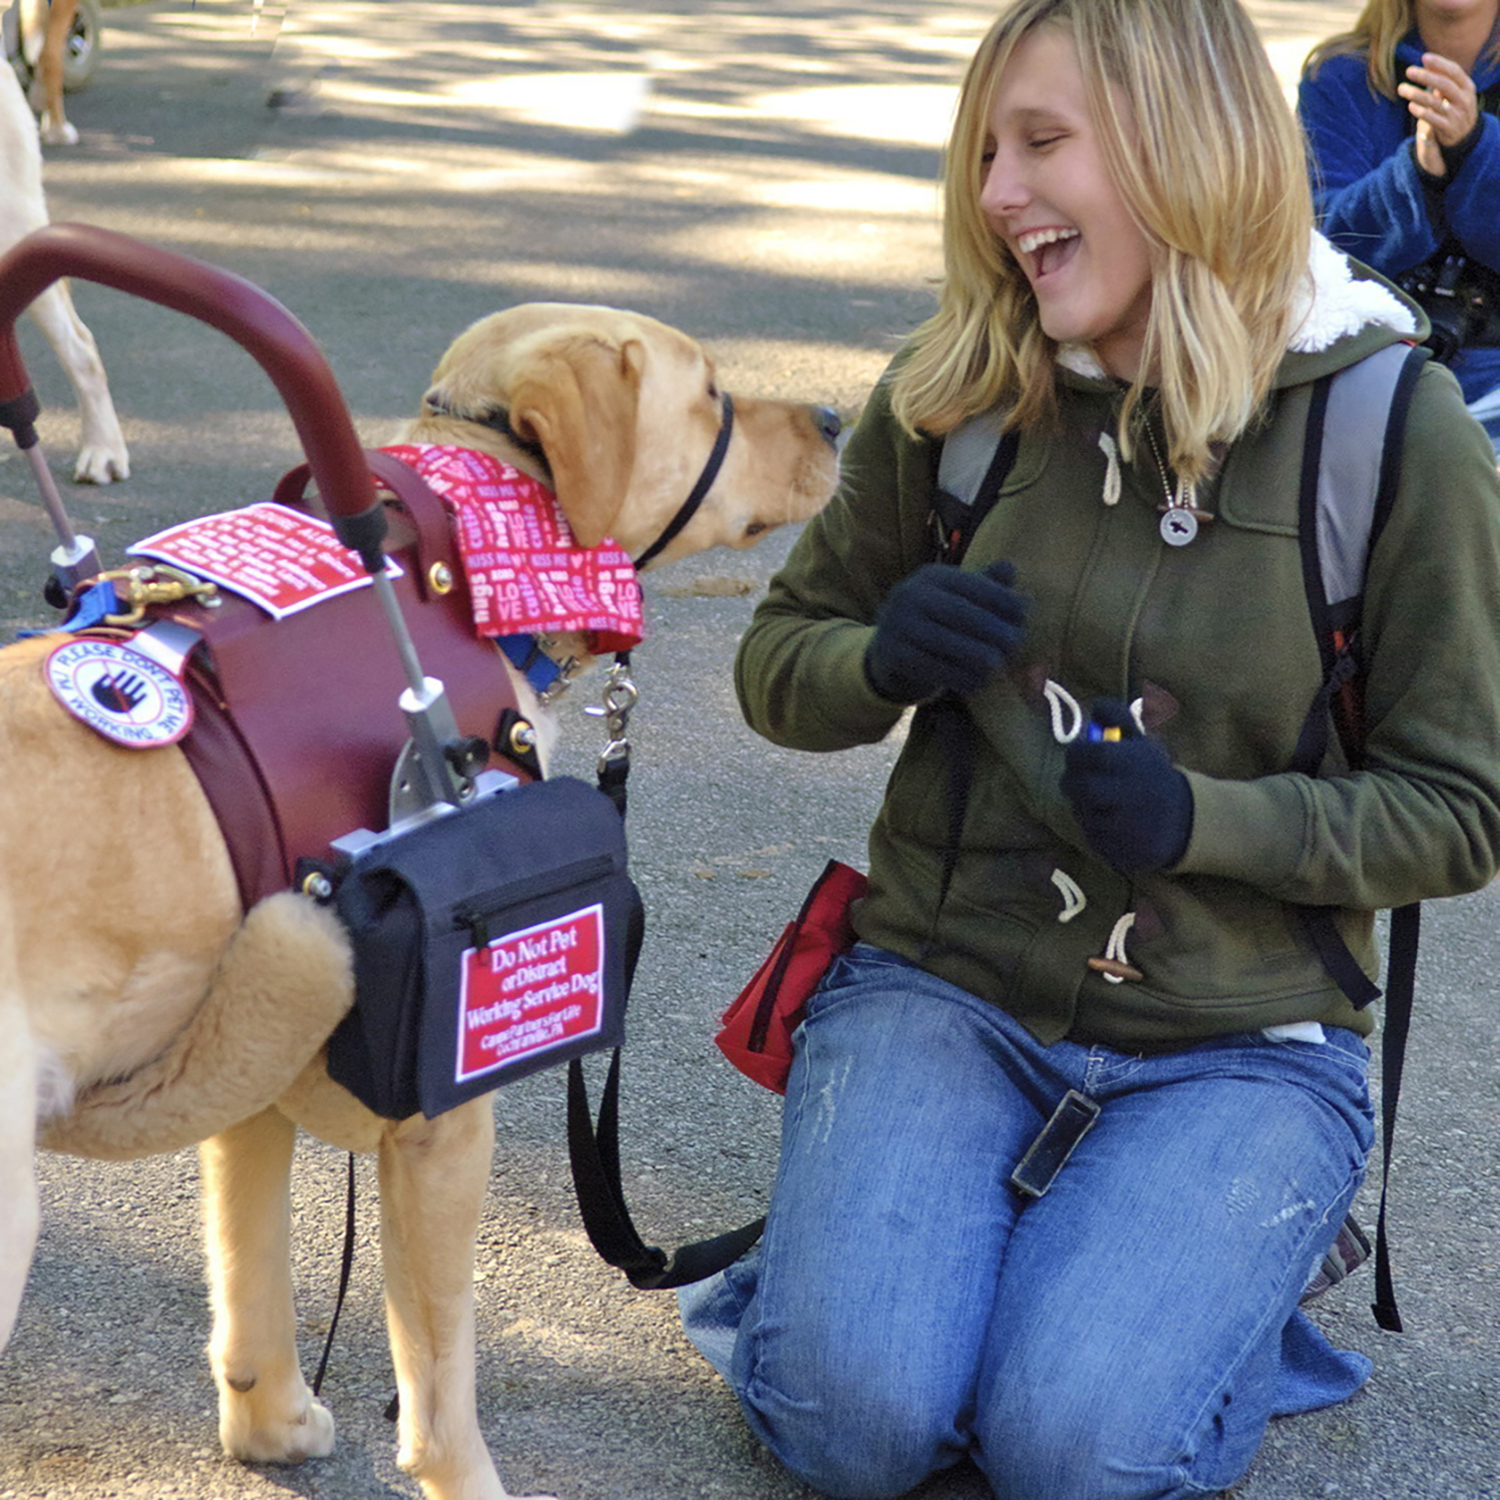 A smiling young woman kneels next to a service dog